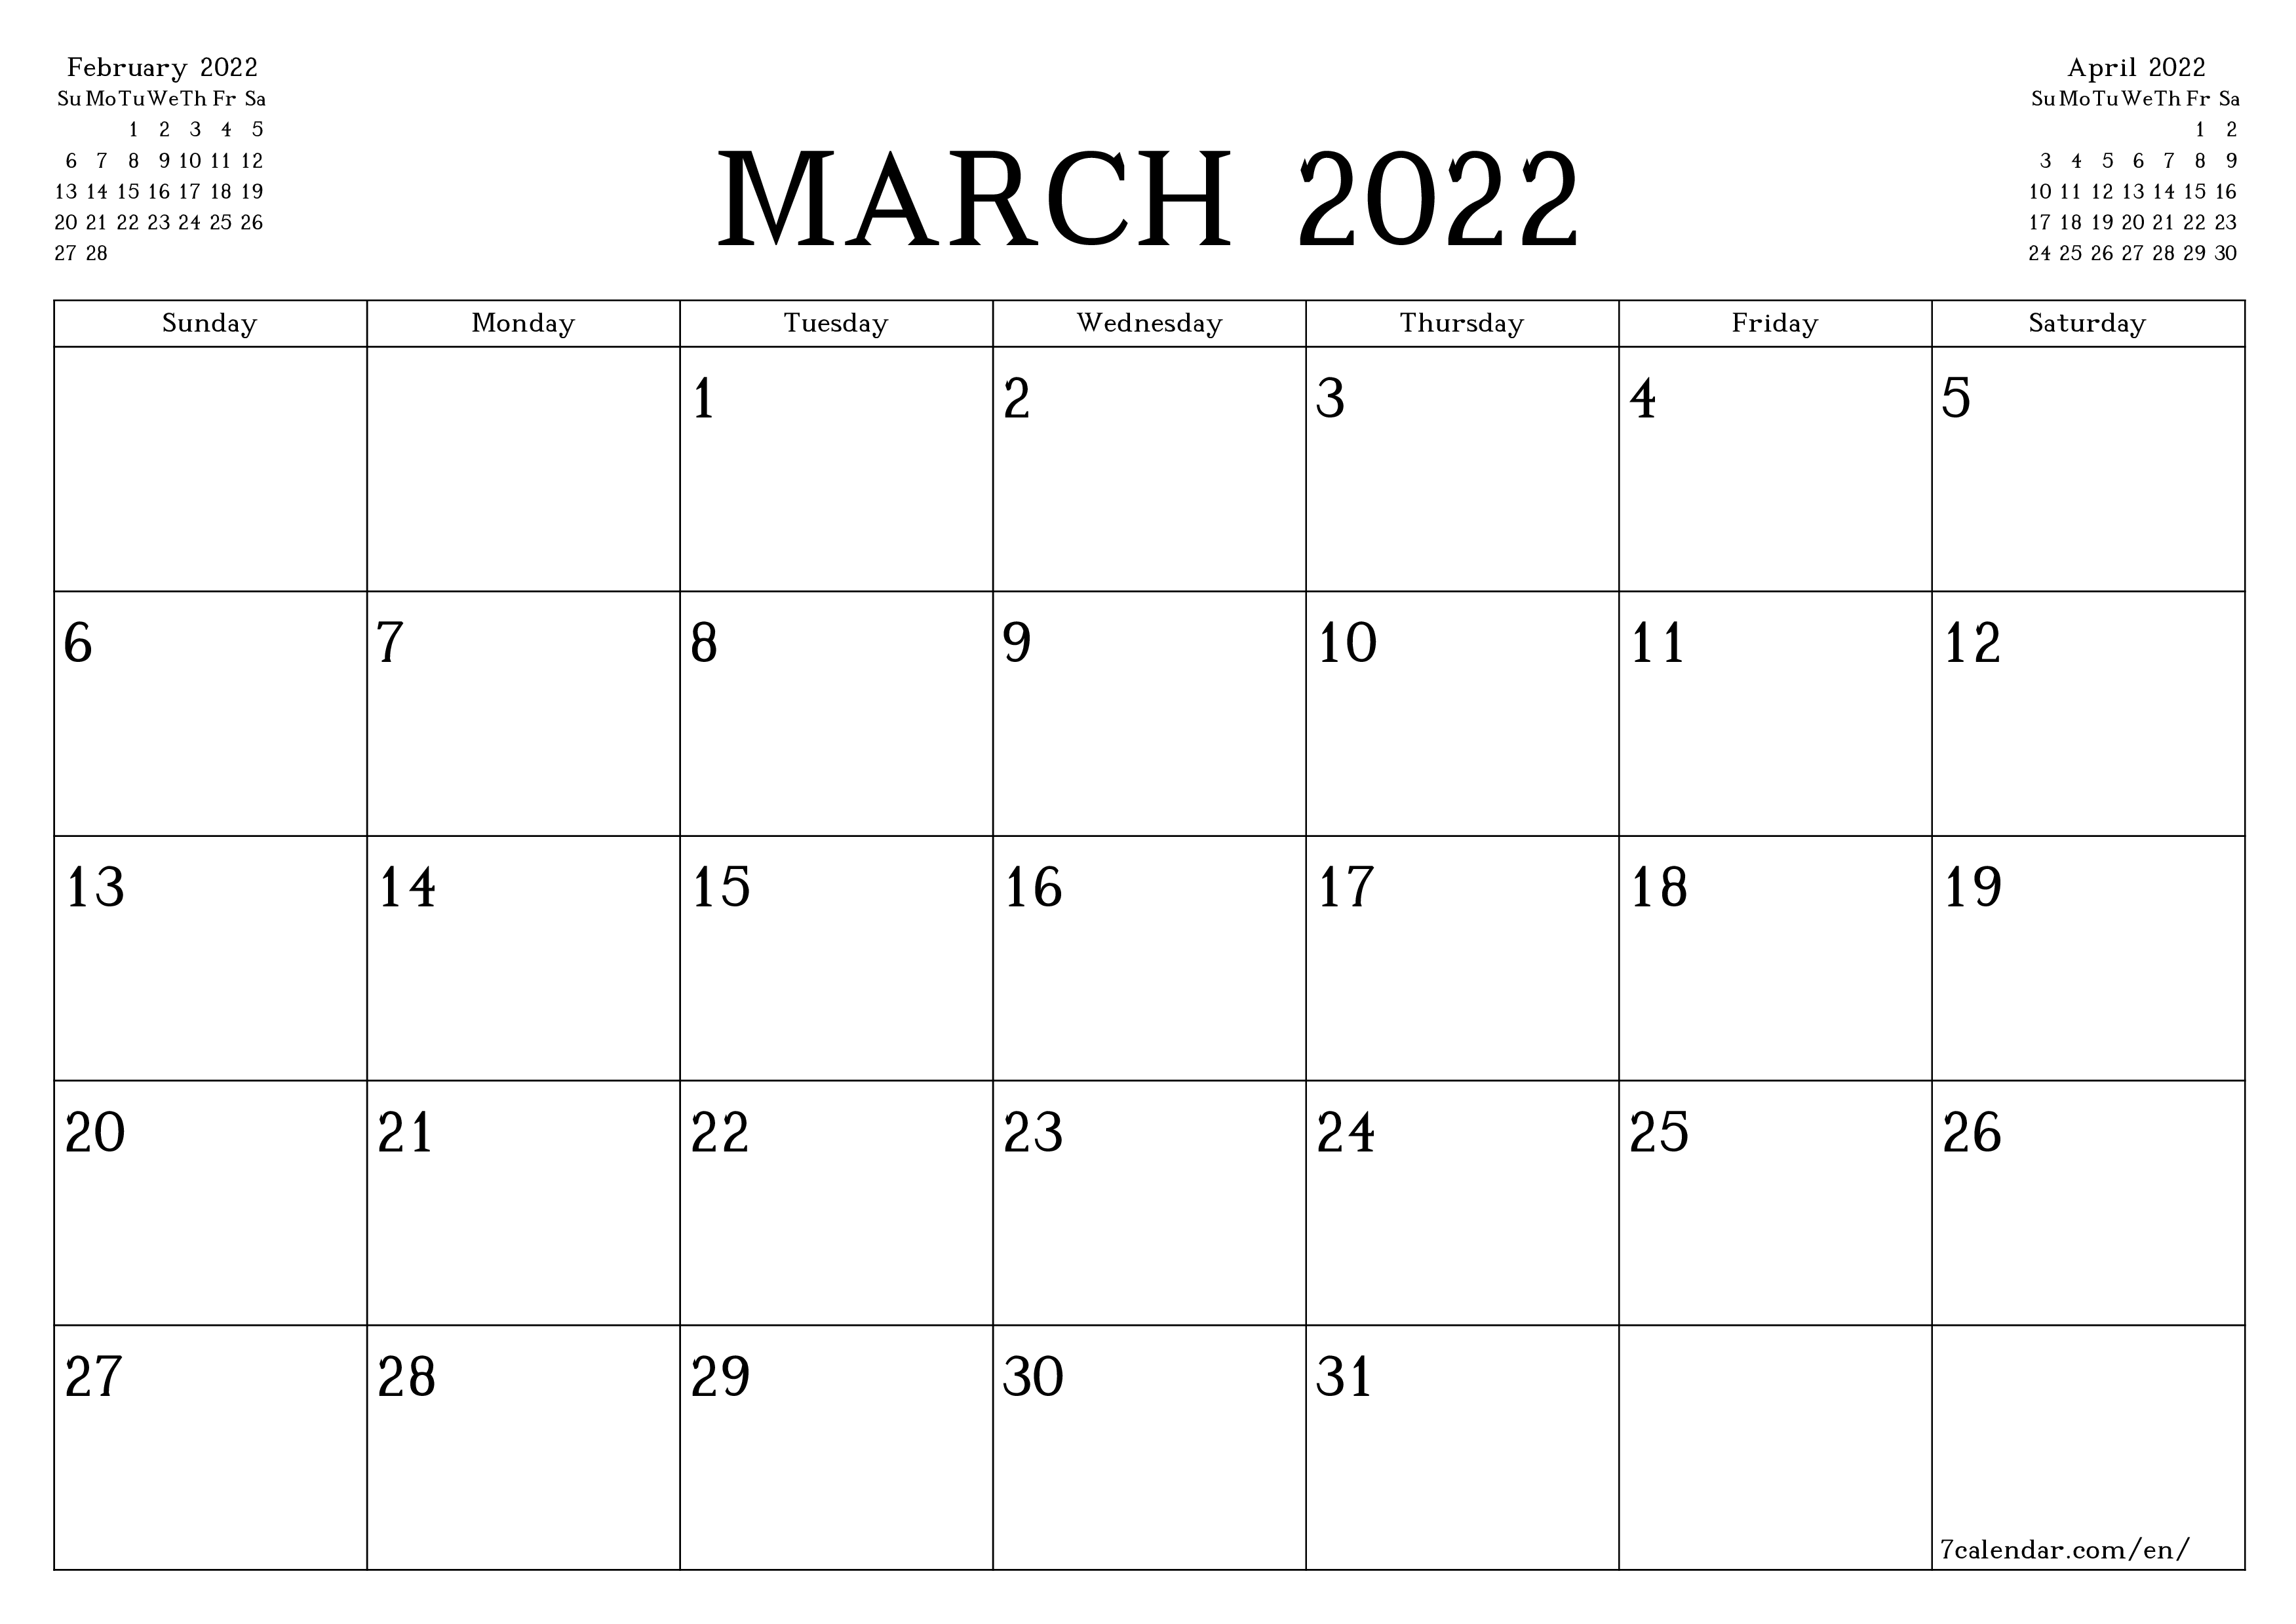 March Calendar 2022 Printable March 2022 Free Printable Calendars And Planners, Pdf Templates - 7Calendar